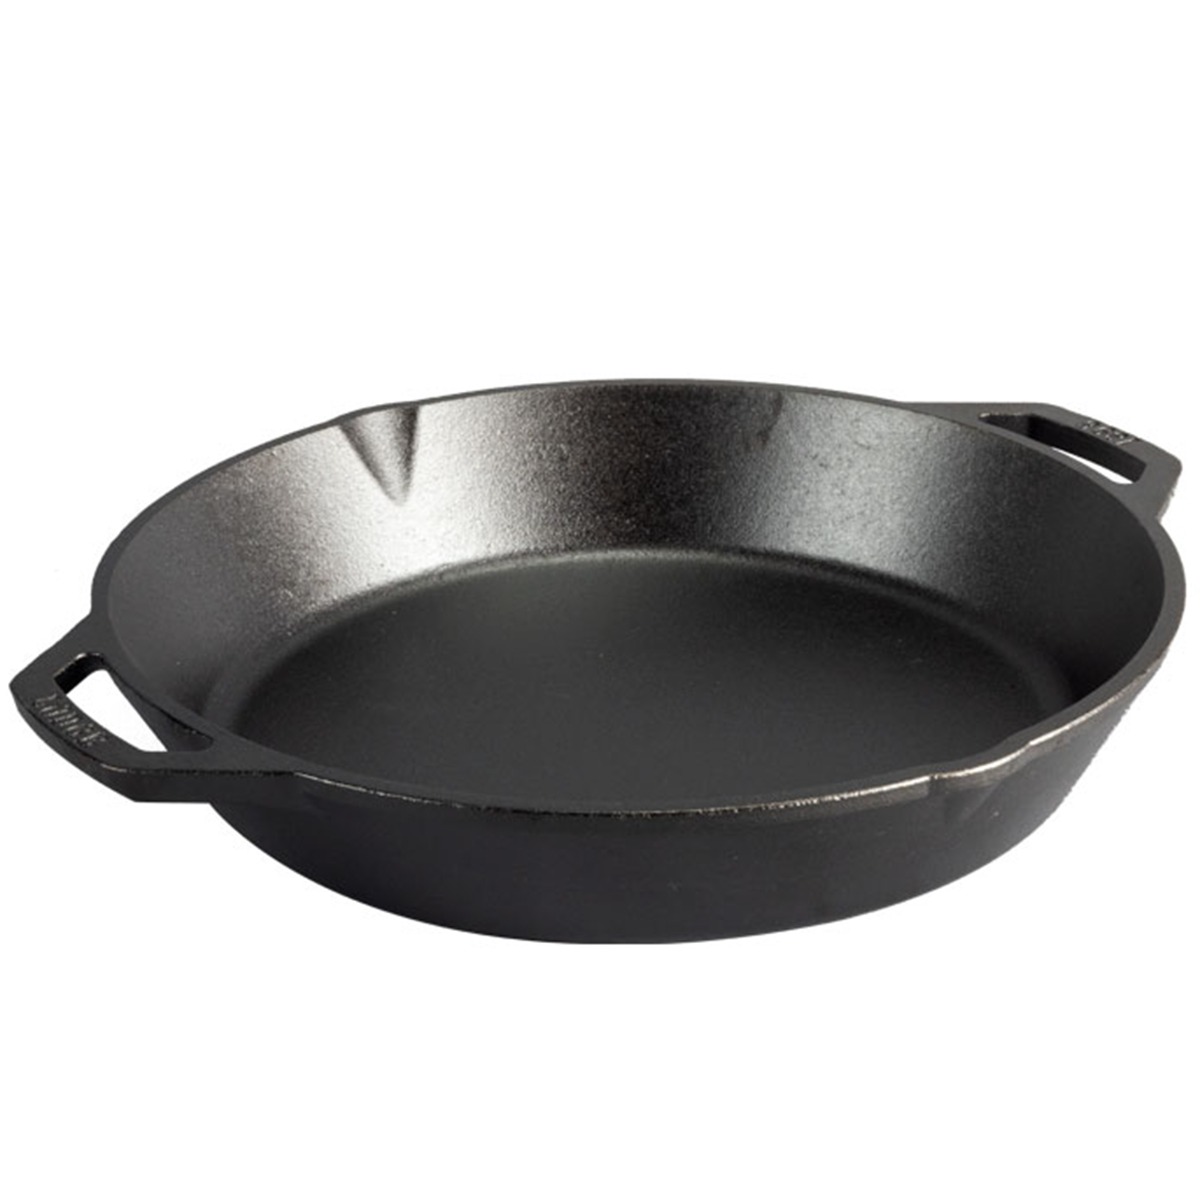 Cast Iron Pan with 2 loop-style handles (D: 33.66 cm) - Lodge®